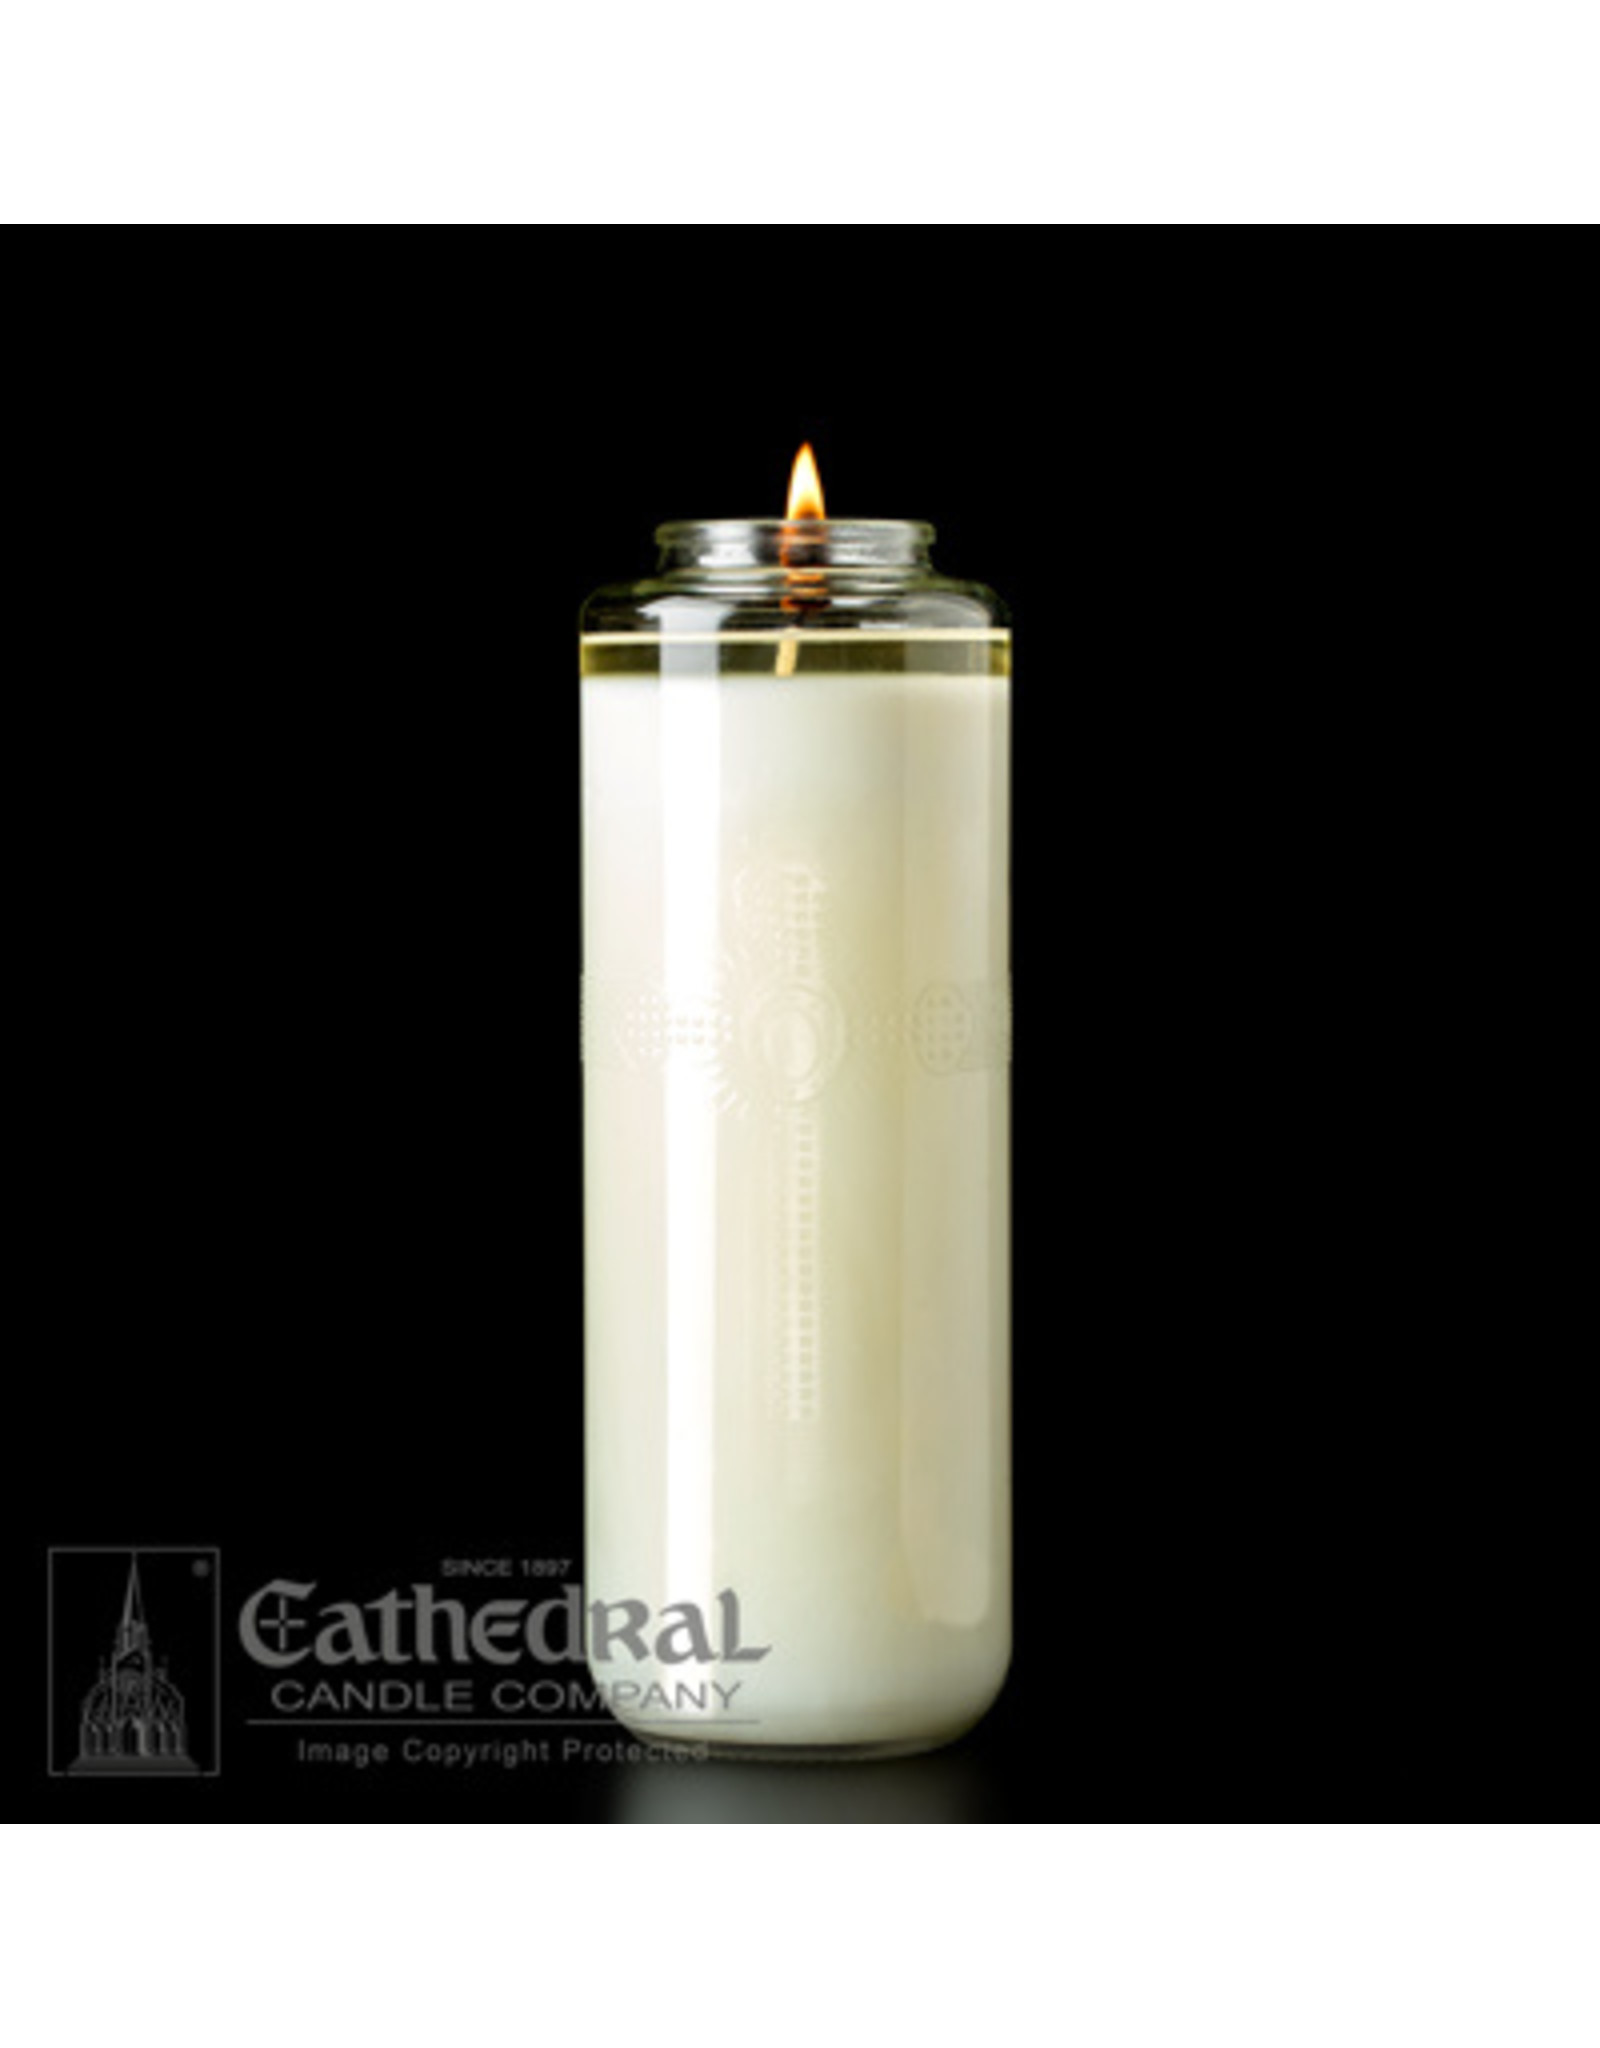 Cathedral Candle 8-Day 51% Beeswax "Domus Christi" Glass Candles (12)